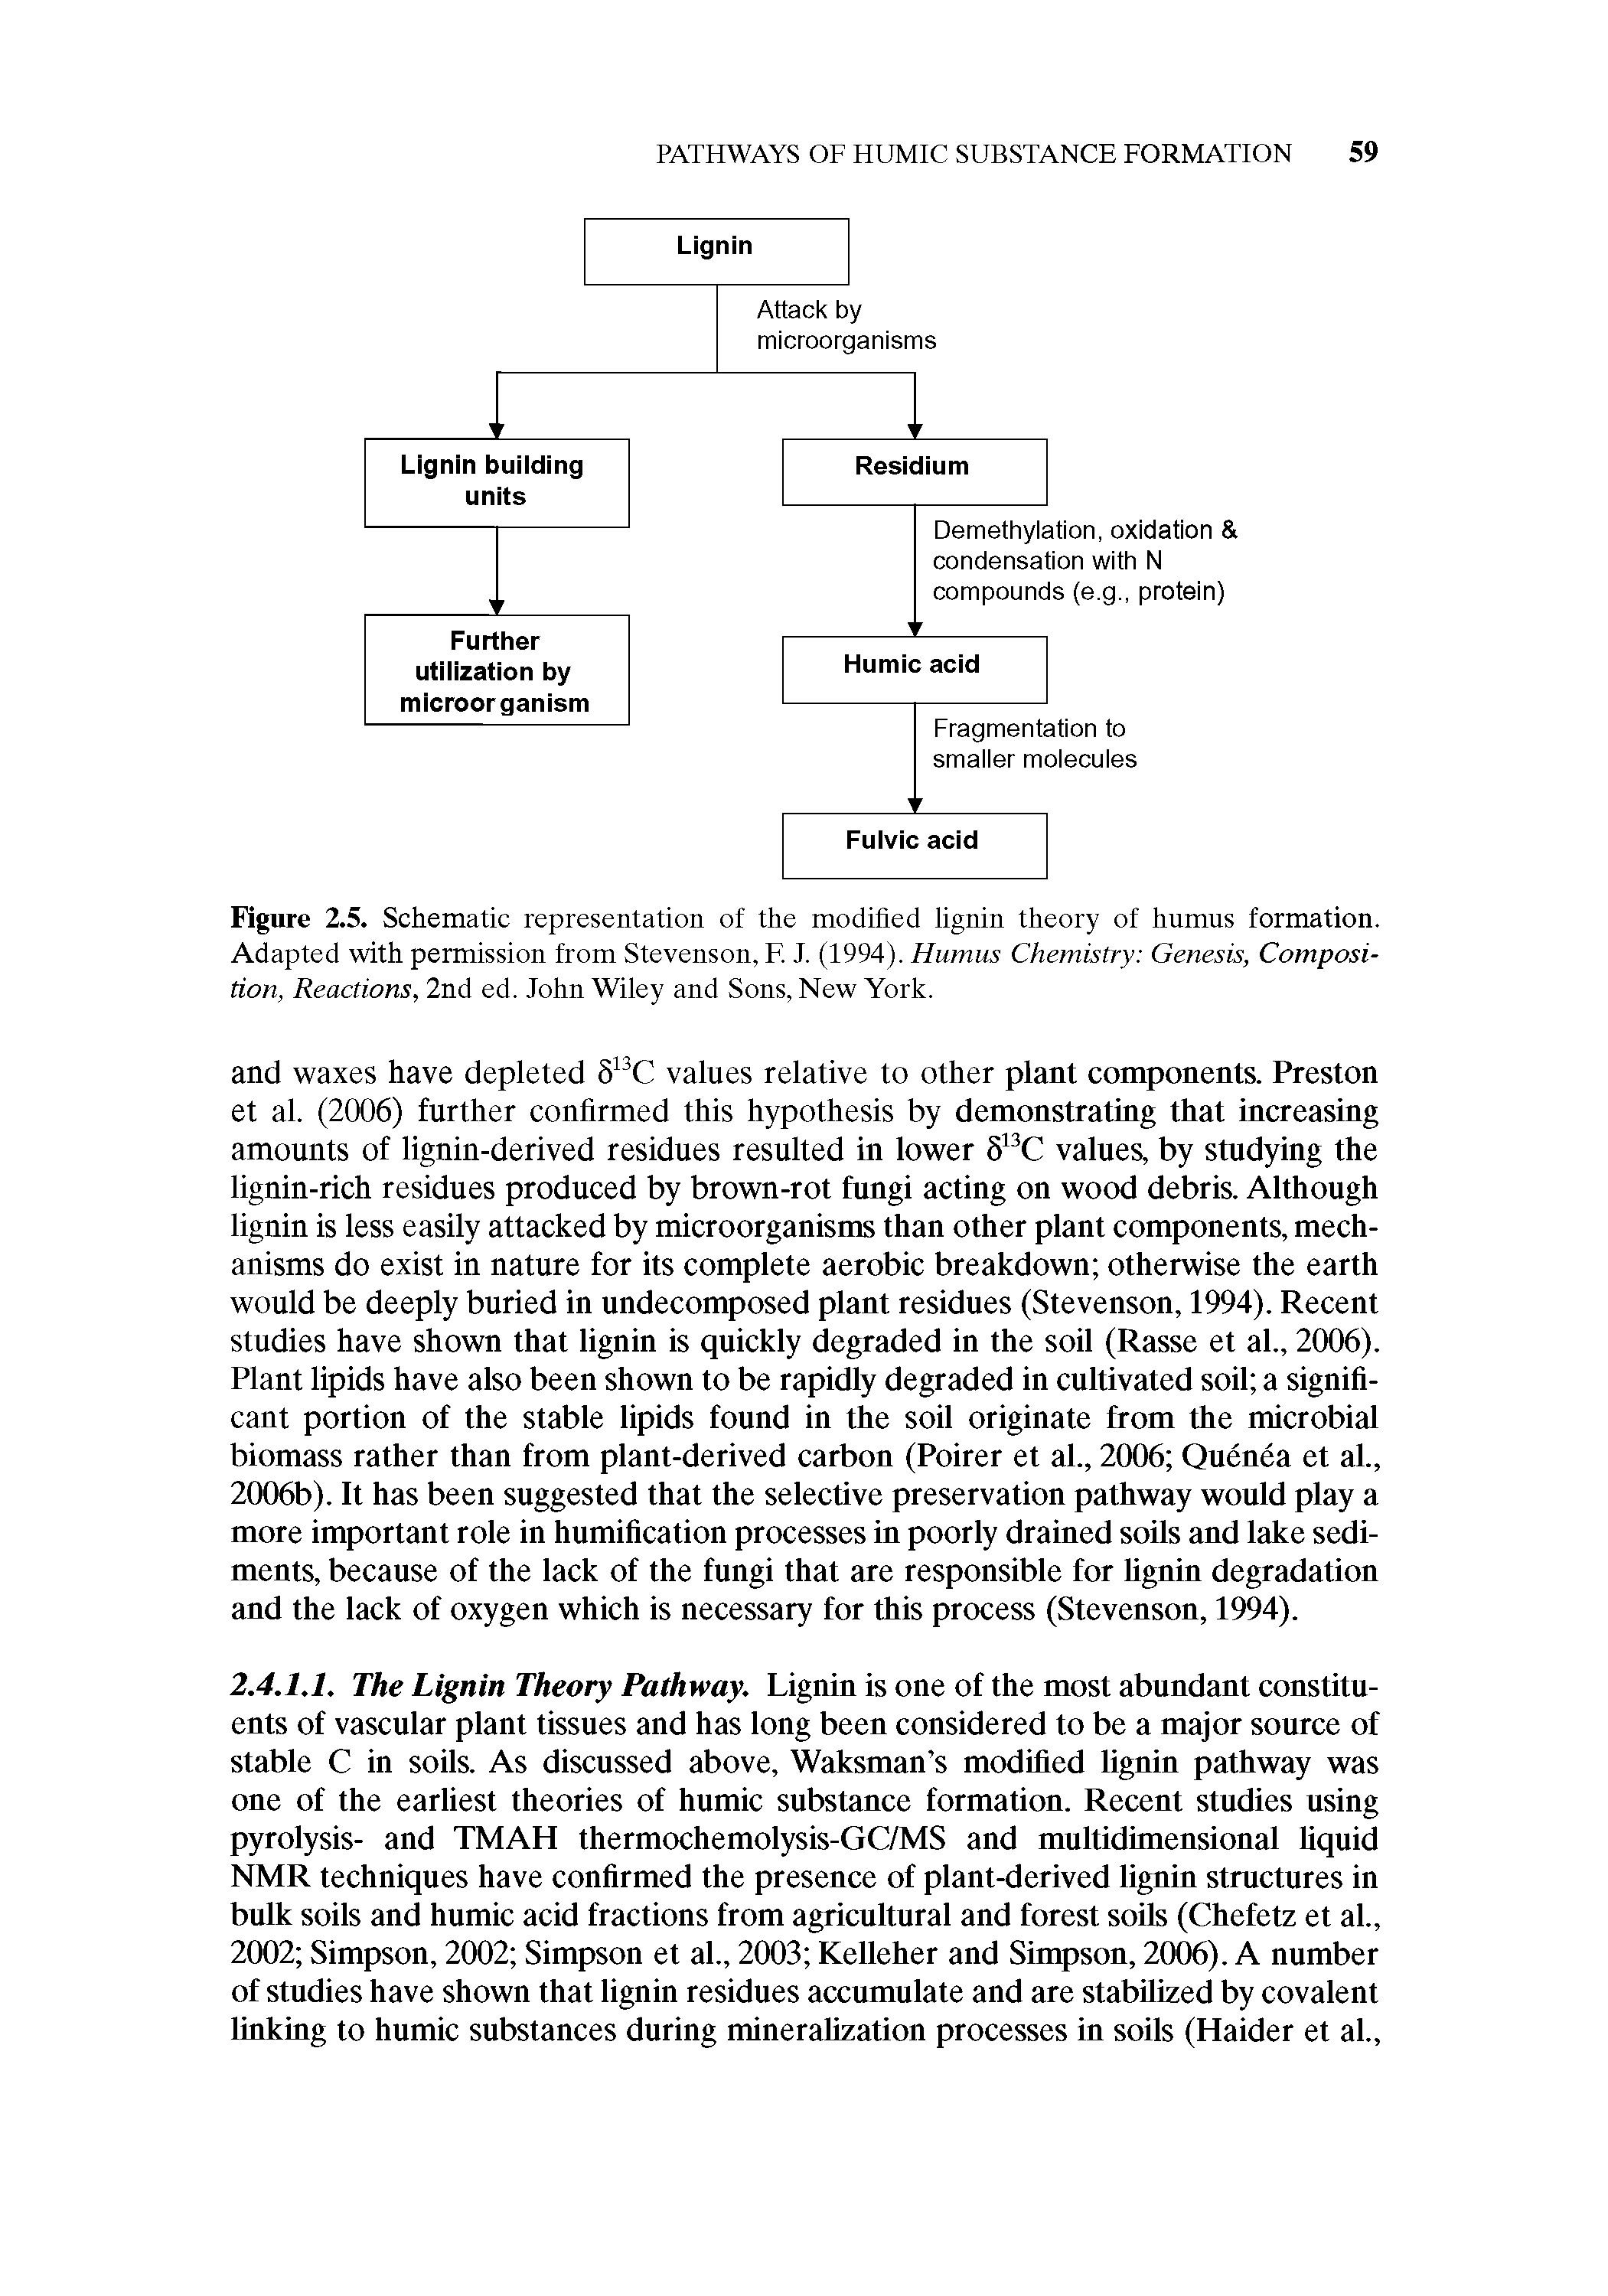 Figure 2.5. Schematic representation of the modified lignin theory of humus formation. Adapted with permission from Stevenson, F. J. (1994). Humus Chemistry Genesis, Composition, Reactions, 2nd ed. John Wiley and Sons, New York.